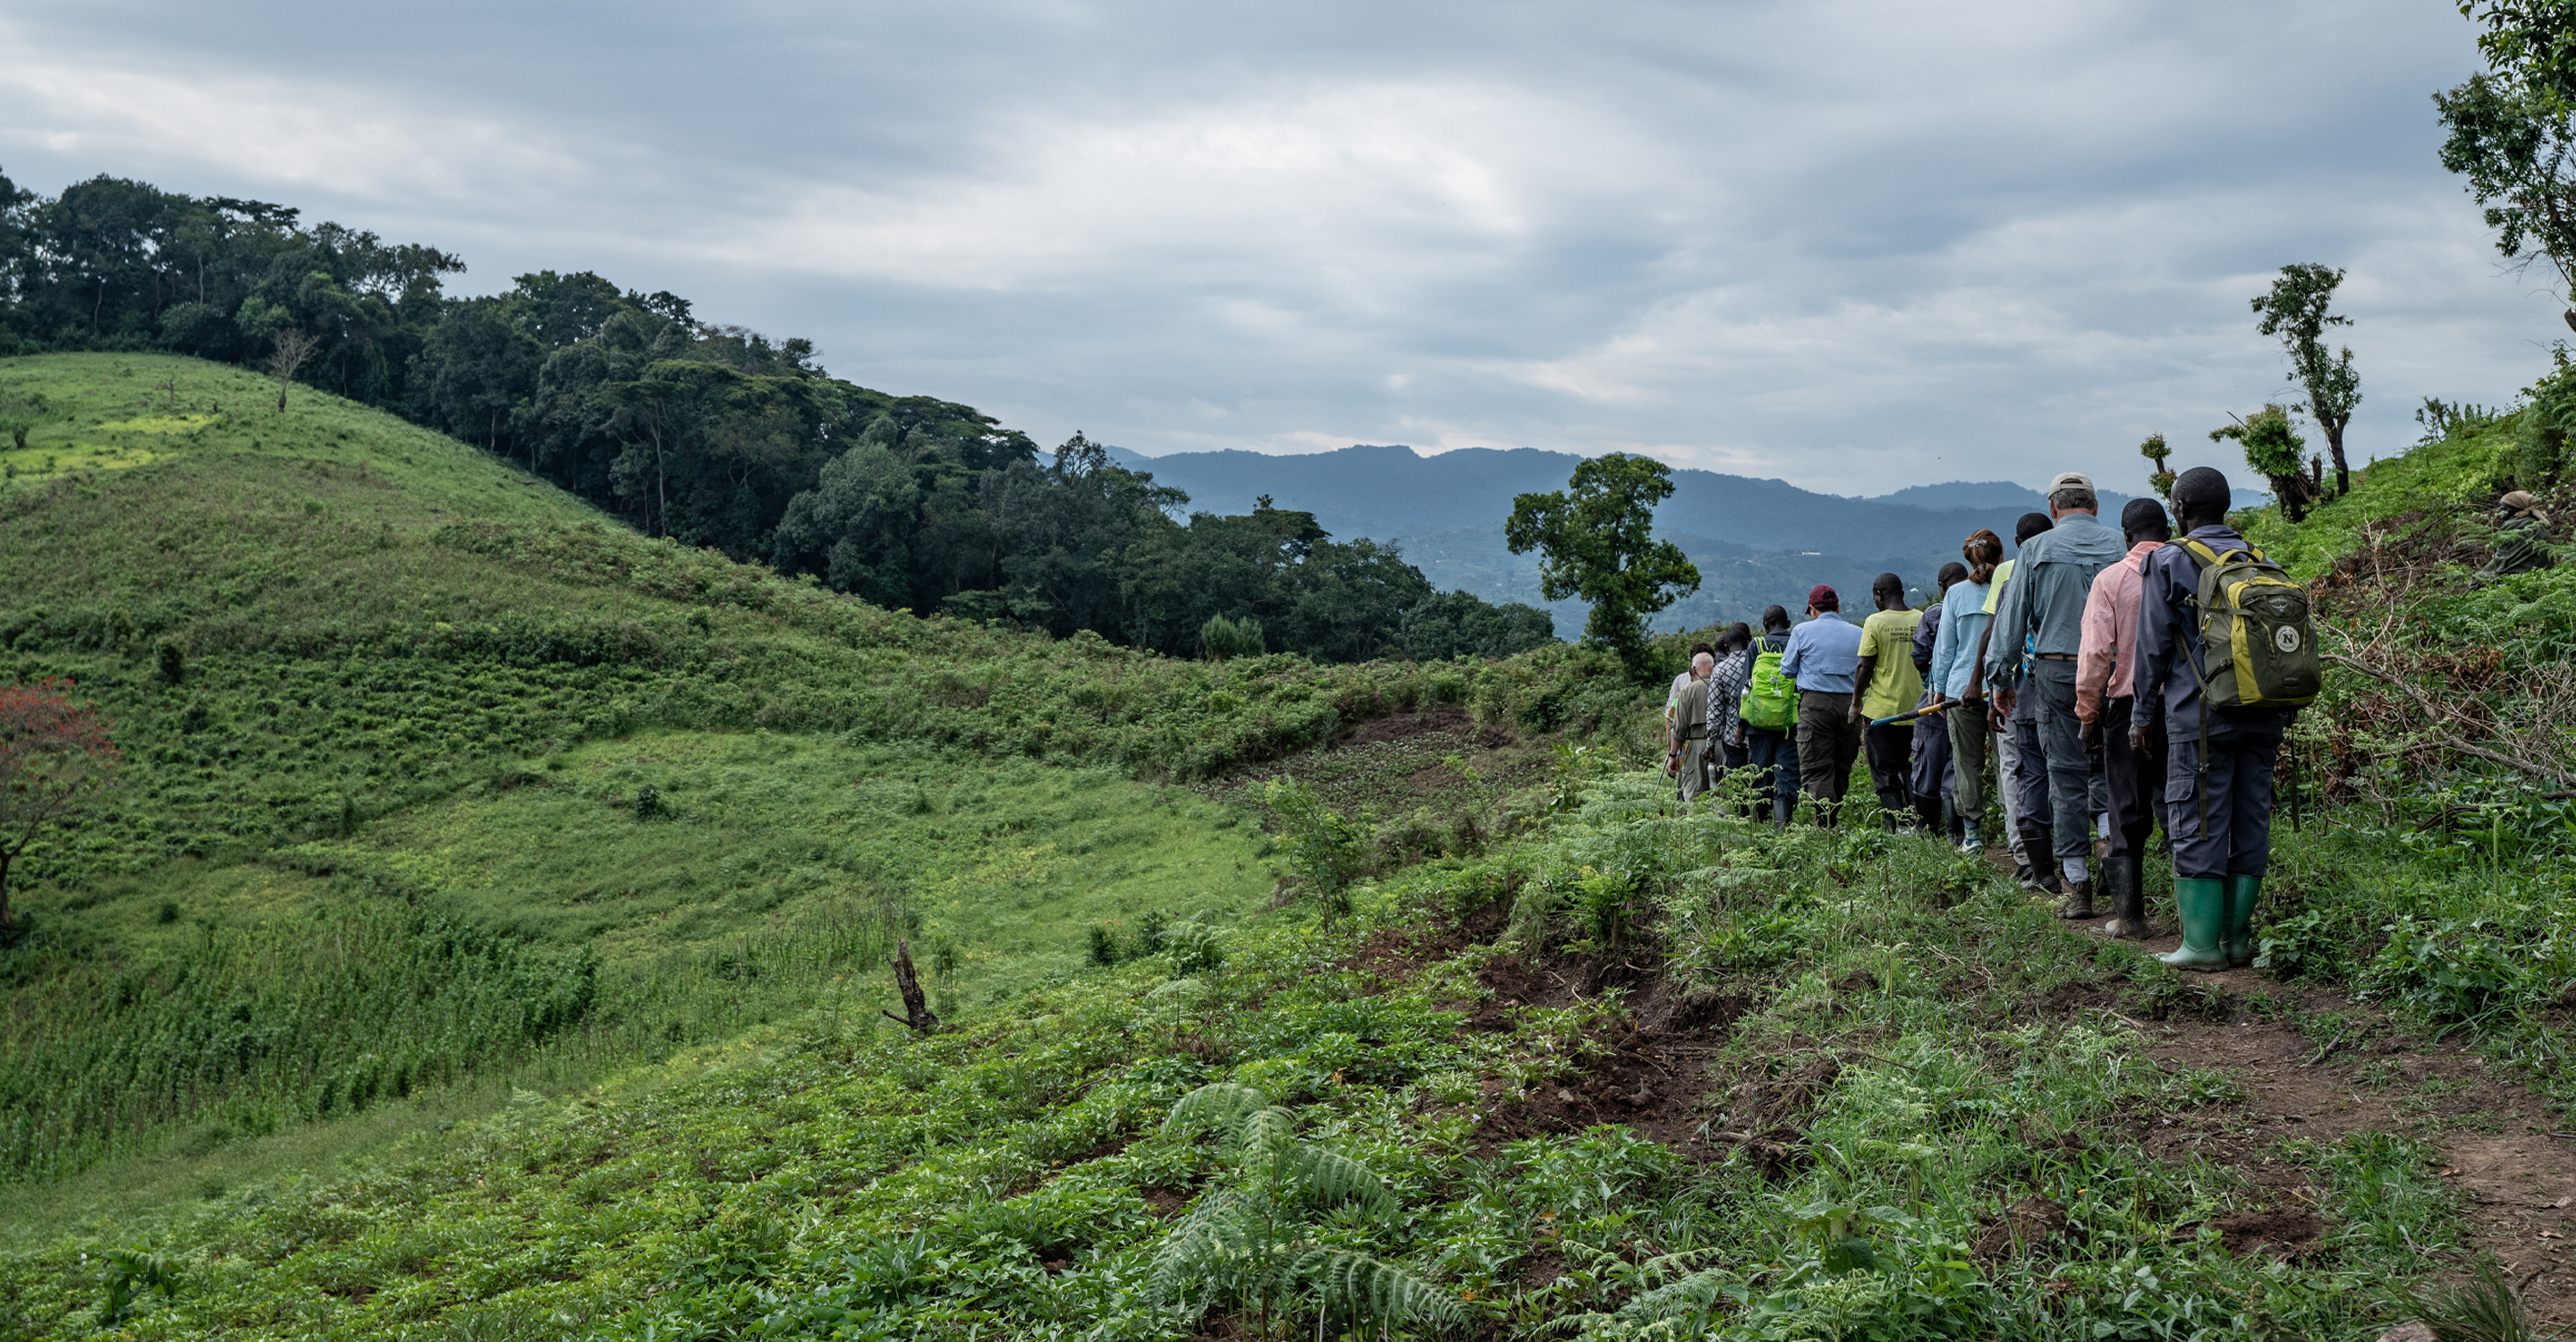 Travelers and local porters hike a path in Bwindi Impenetrable National Park, Uganda